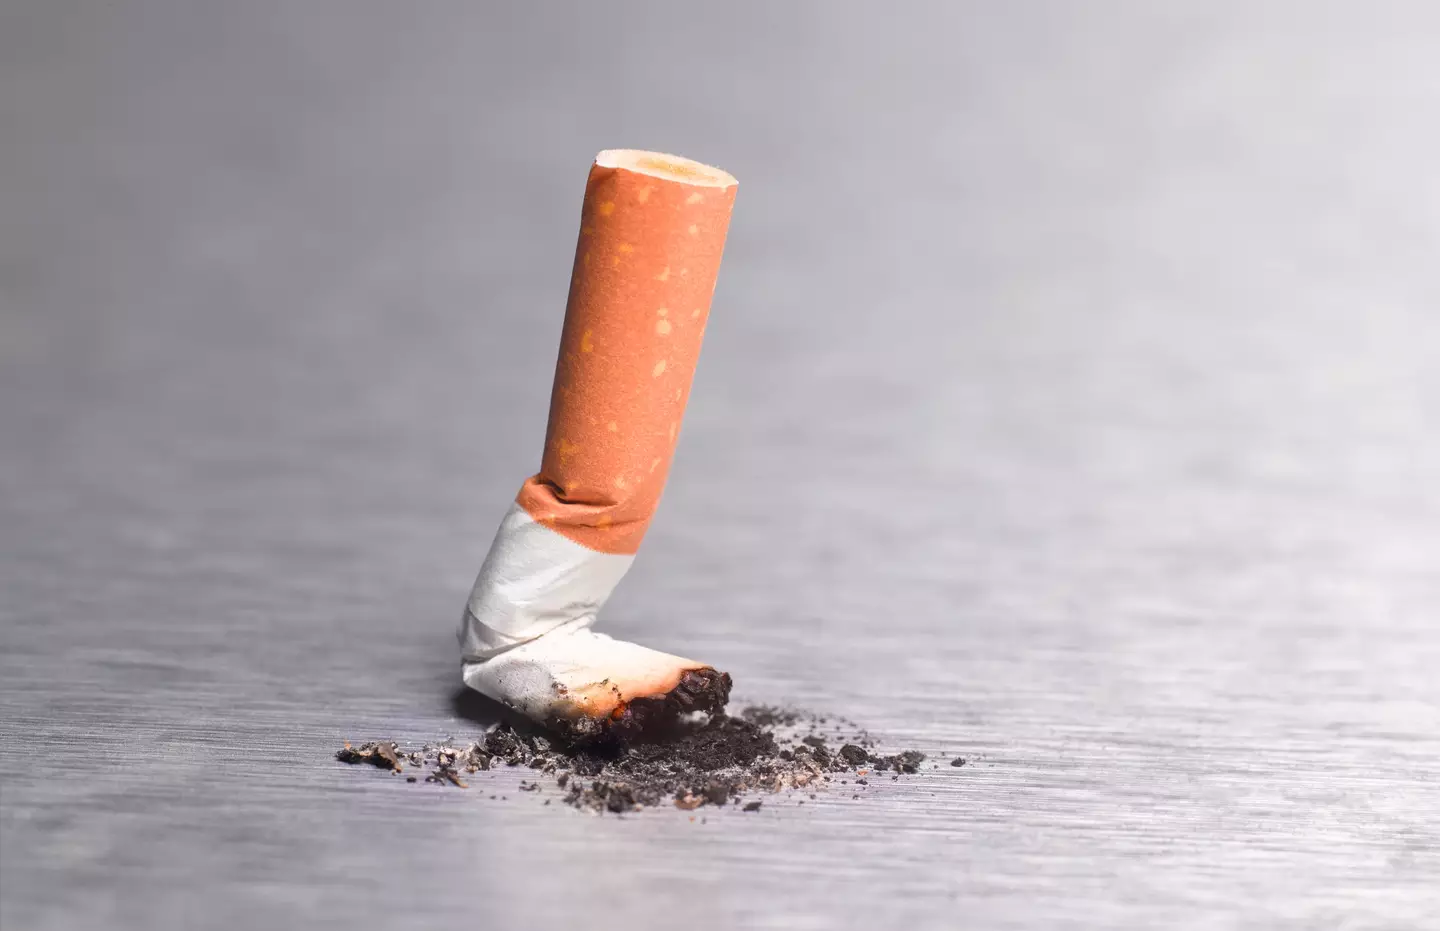 Anyone under a certain age will never be able to buy cigarettes legally under the proposed new rules.